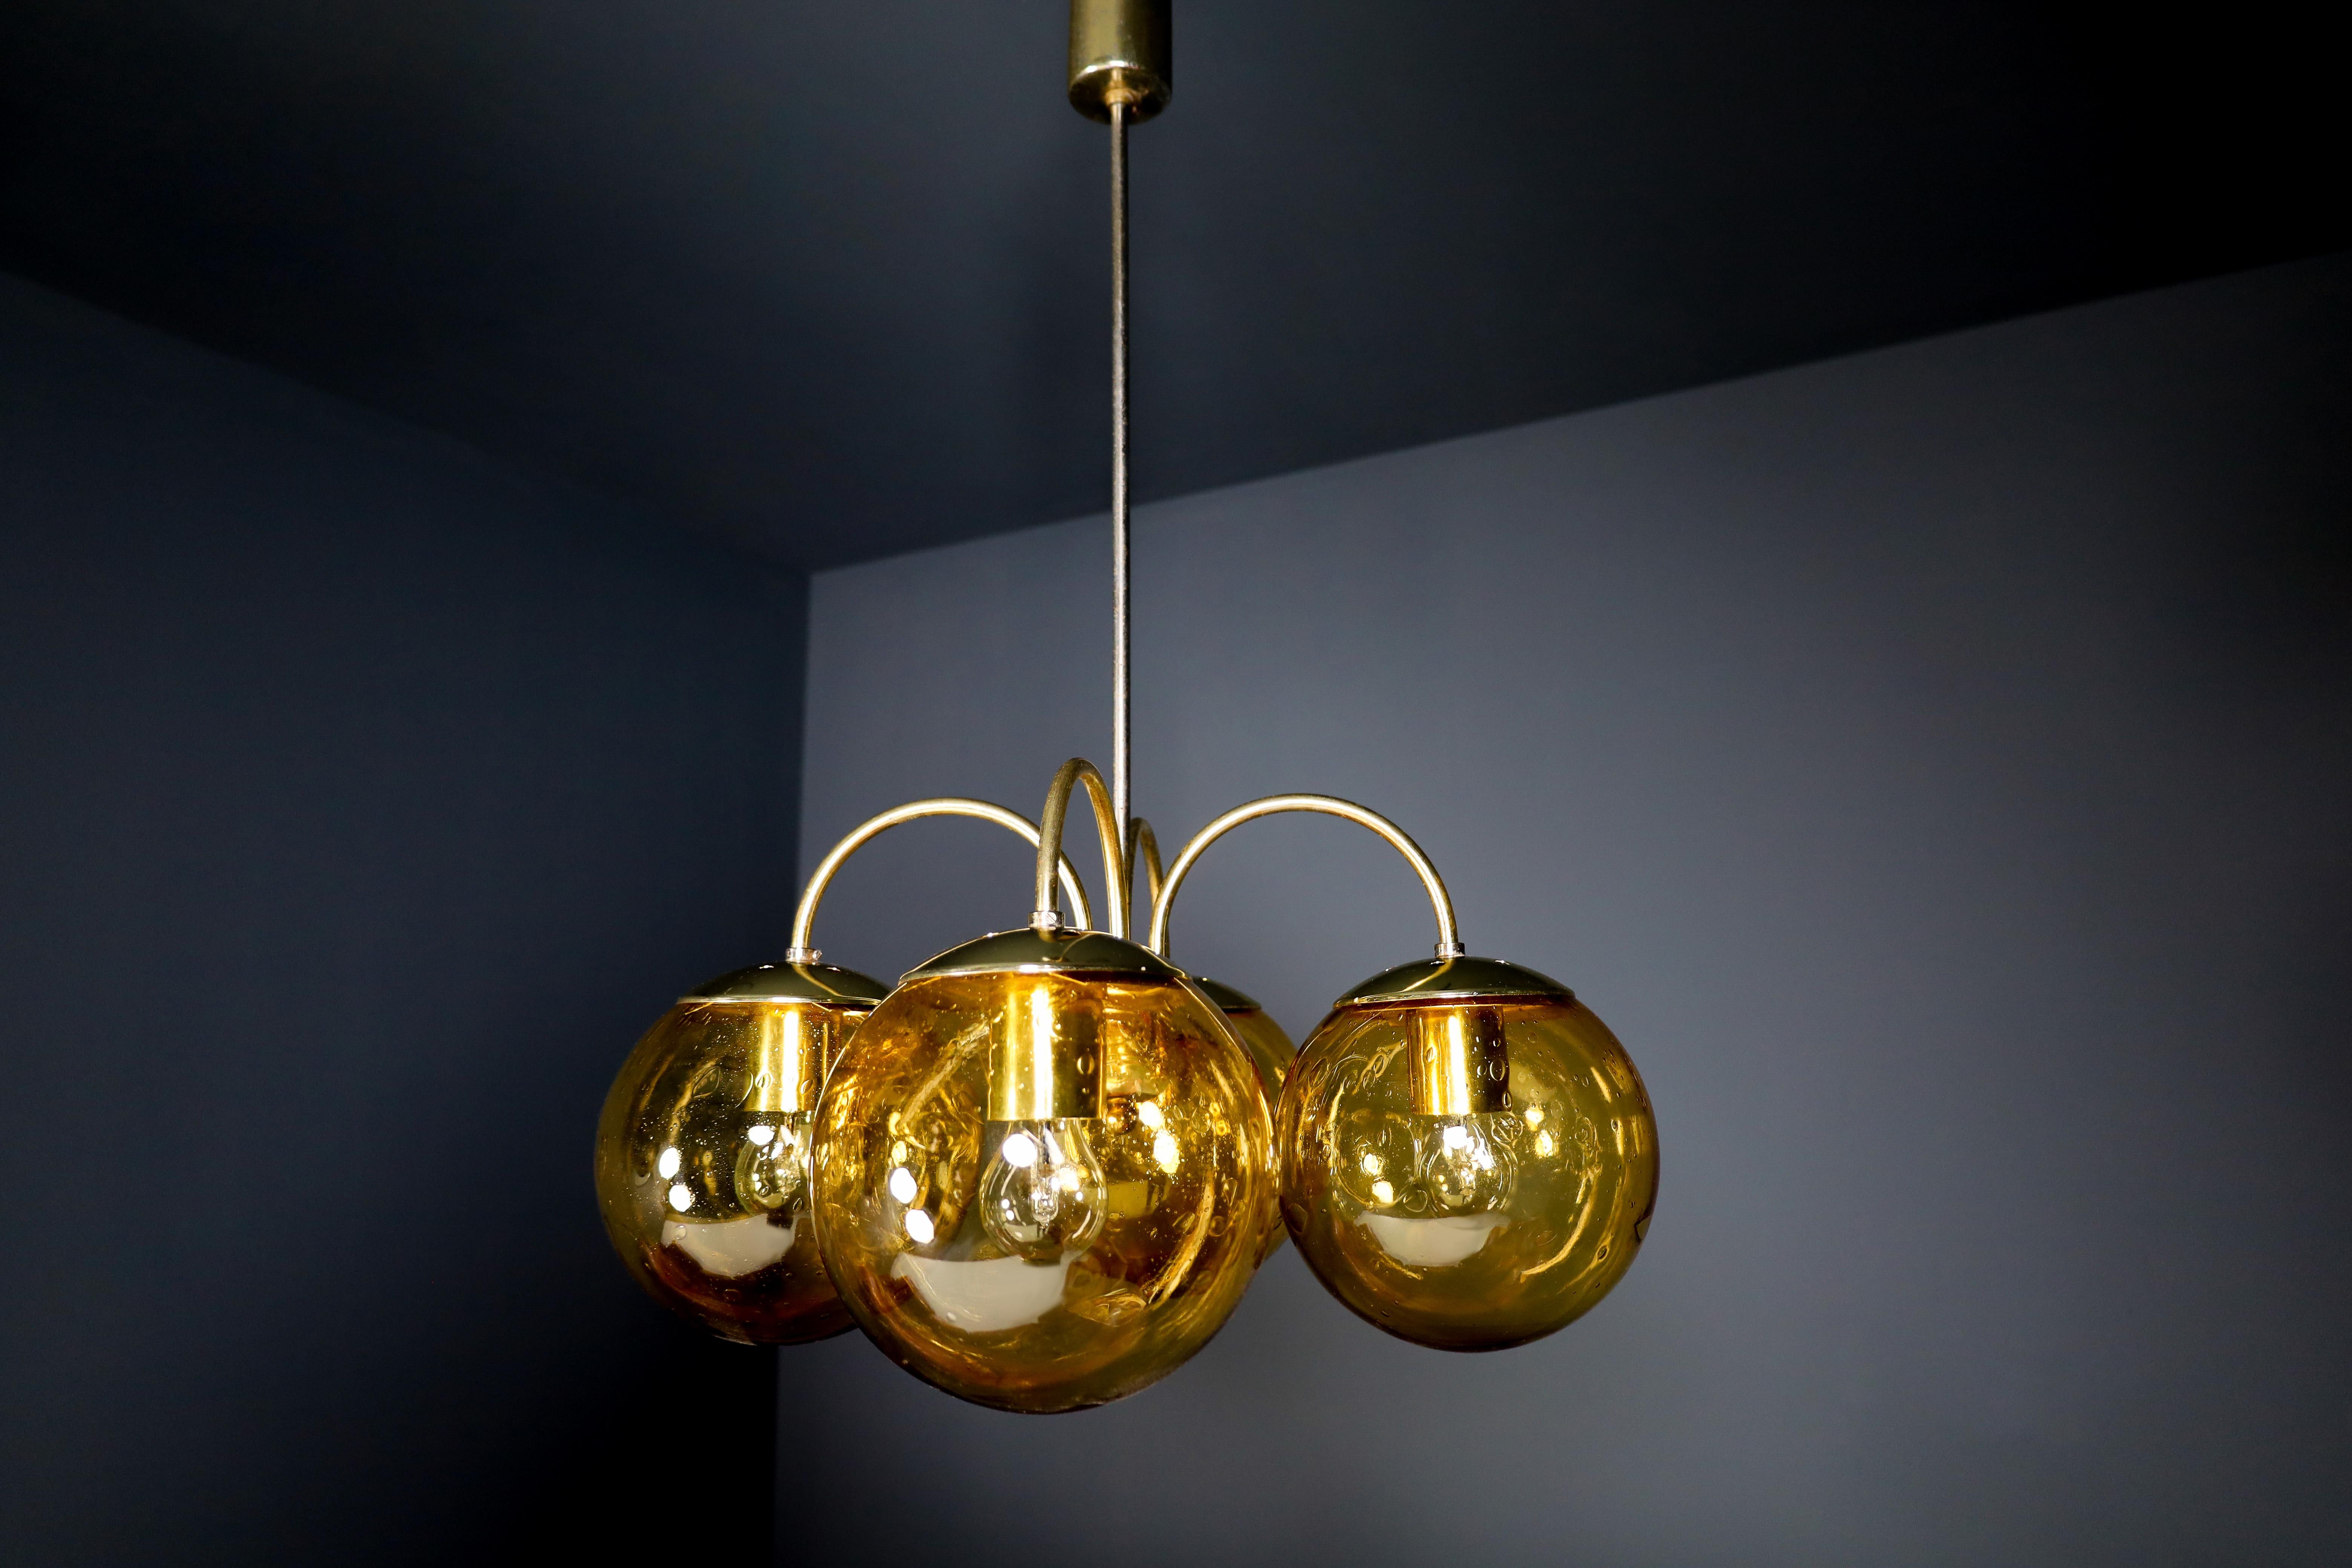 Mid-Century Modern Midcentury Chandeliers in Brass and Amber-Colored Glass Czech Republic, 1960s For Sale